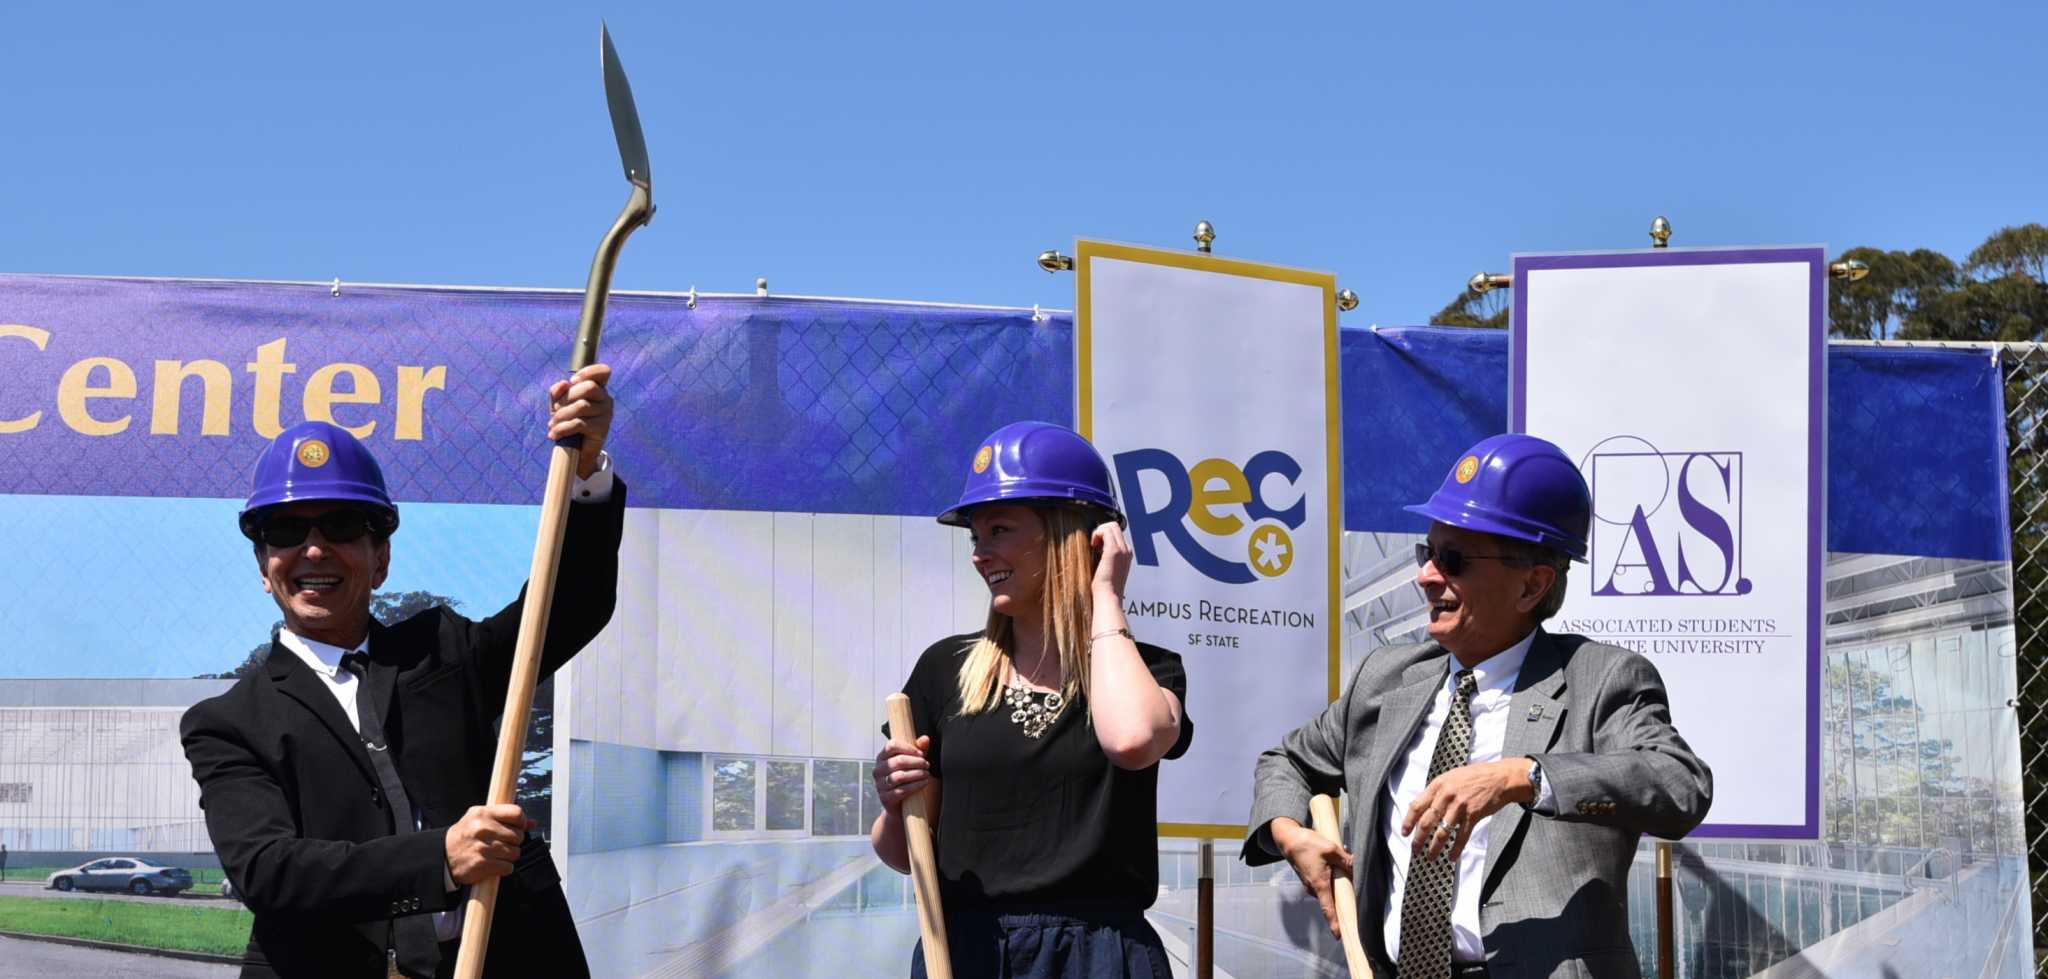 (From left) SF State alumnus and Bebe Stores founder Manny Mashouf,  raises his shovel next to Phoebe Dye, president of Associated Students, Inc. and President Leslie E. Wong during the Mashouf Wellness Center groundbreaking ceremony at the SF State softball field Thursday, June 25, 2015. (Xpress / Qing Huang)